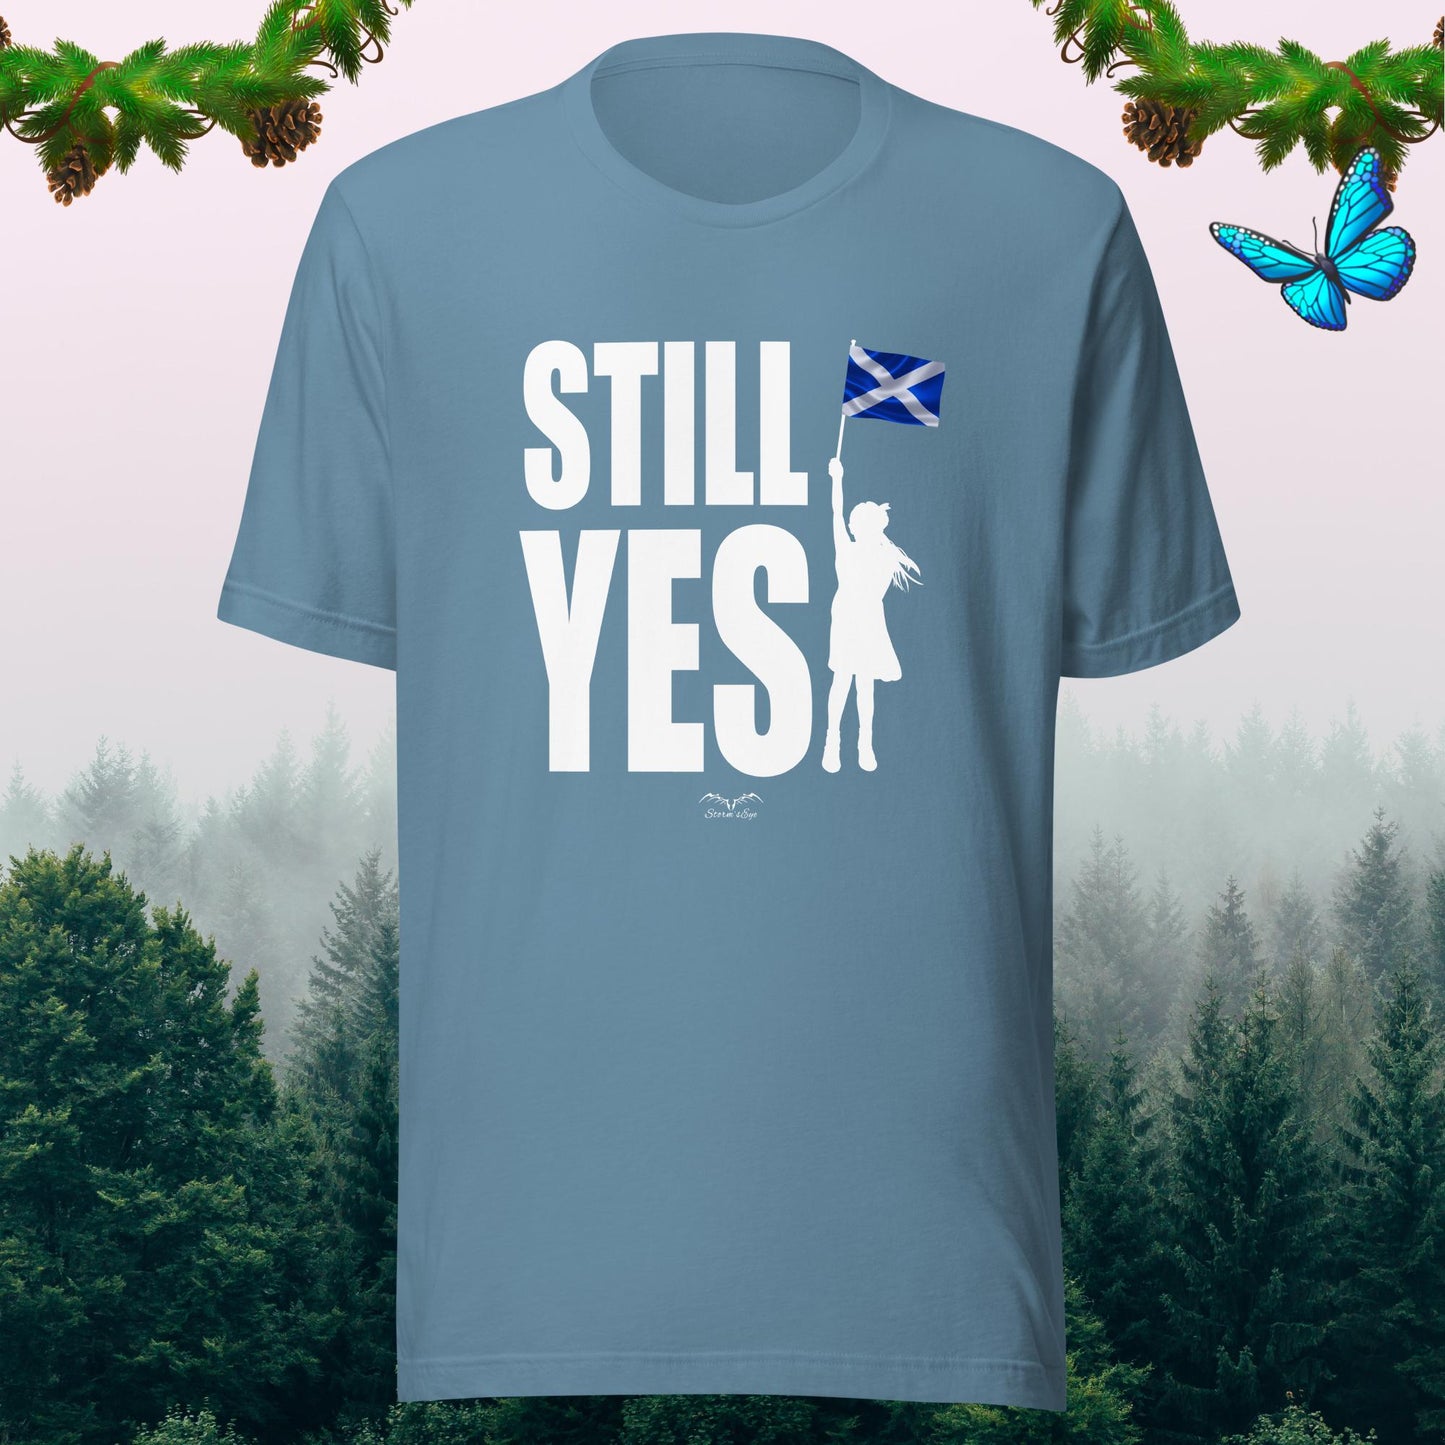 Still Yes Scottish Independence T-shirt light blue by stormseye design